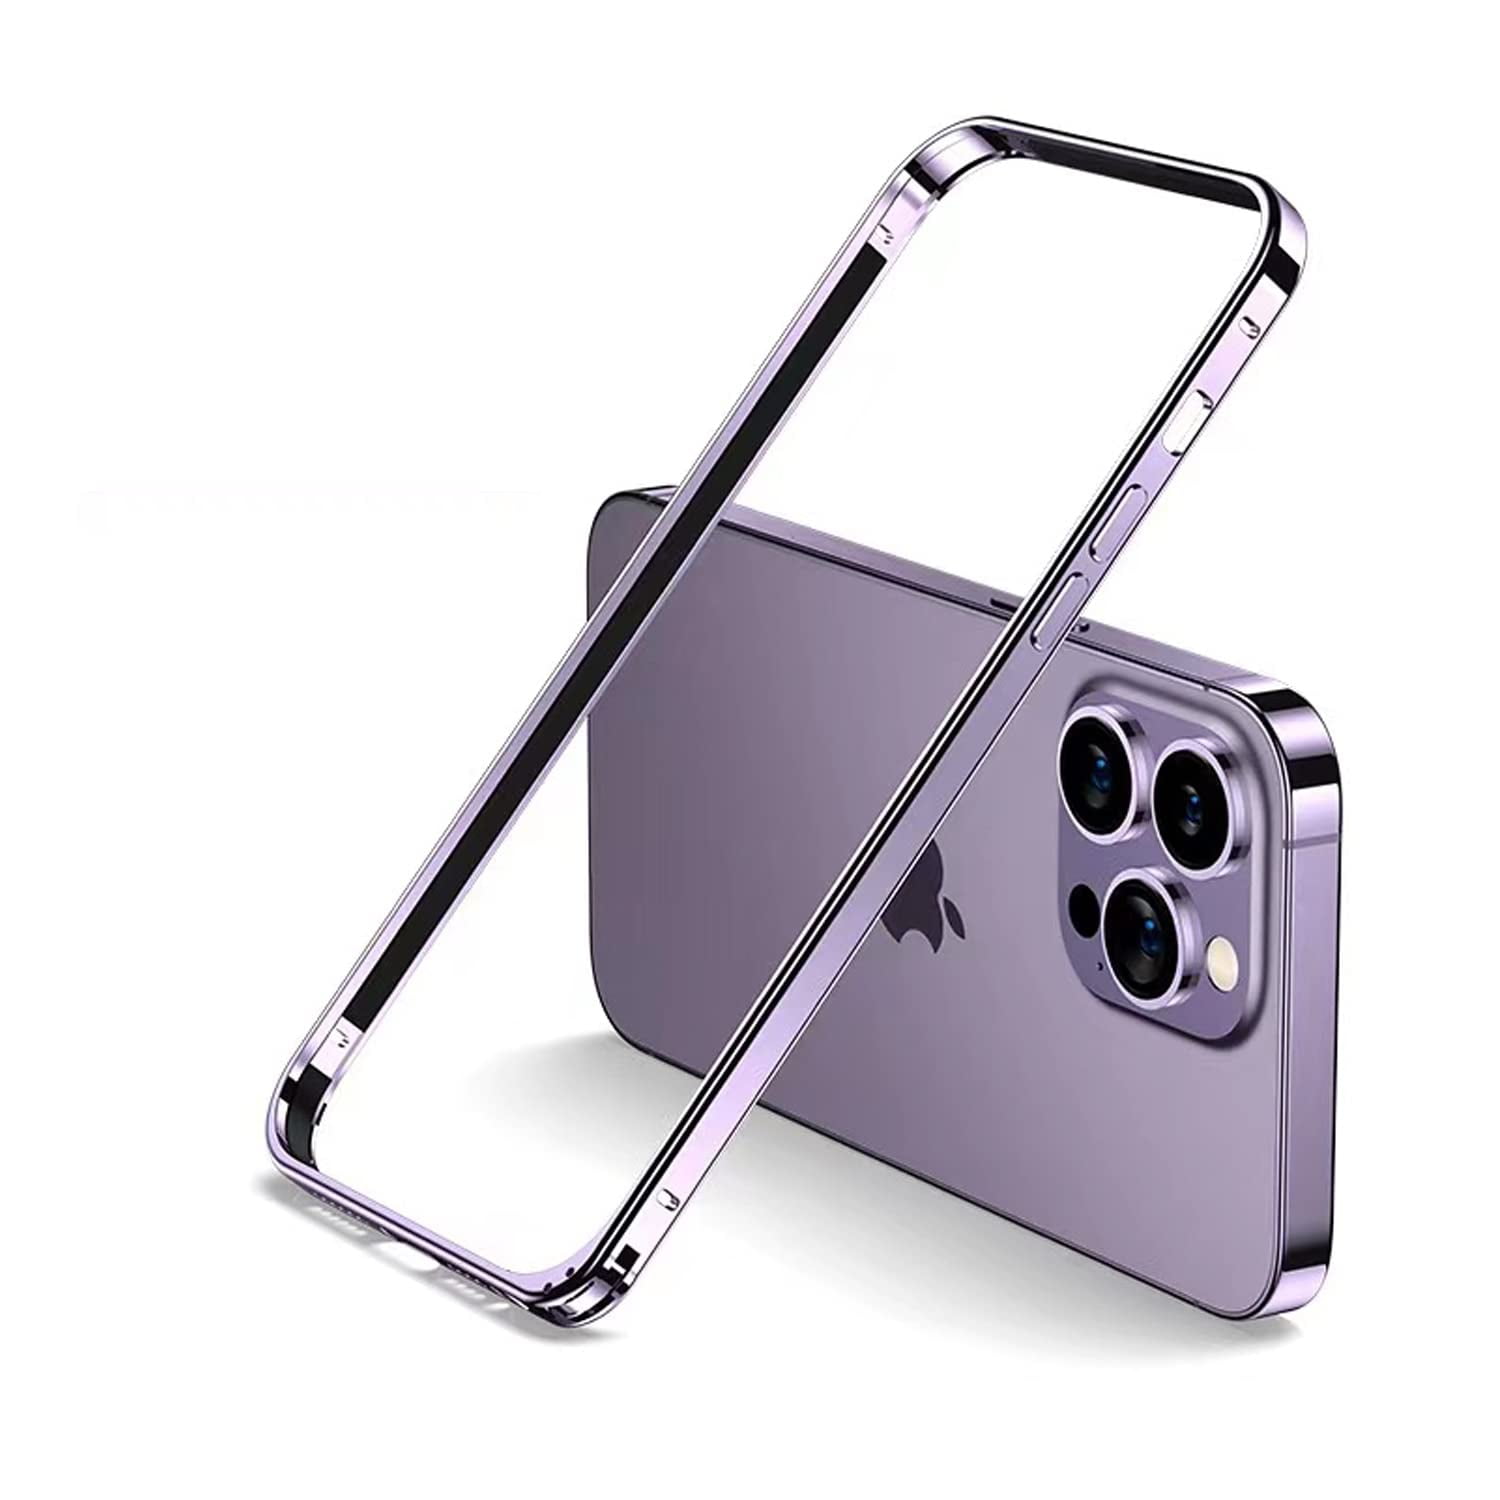 For iPhone 14 Pro Max Protector Bumper Case - Purple - Wirefree